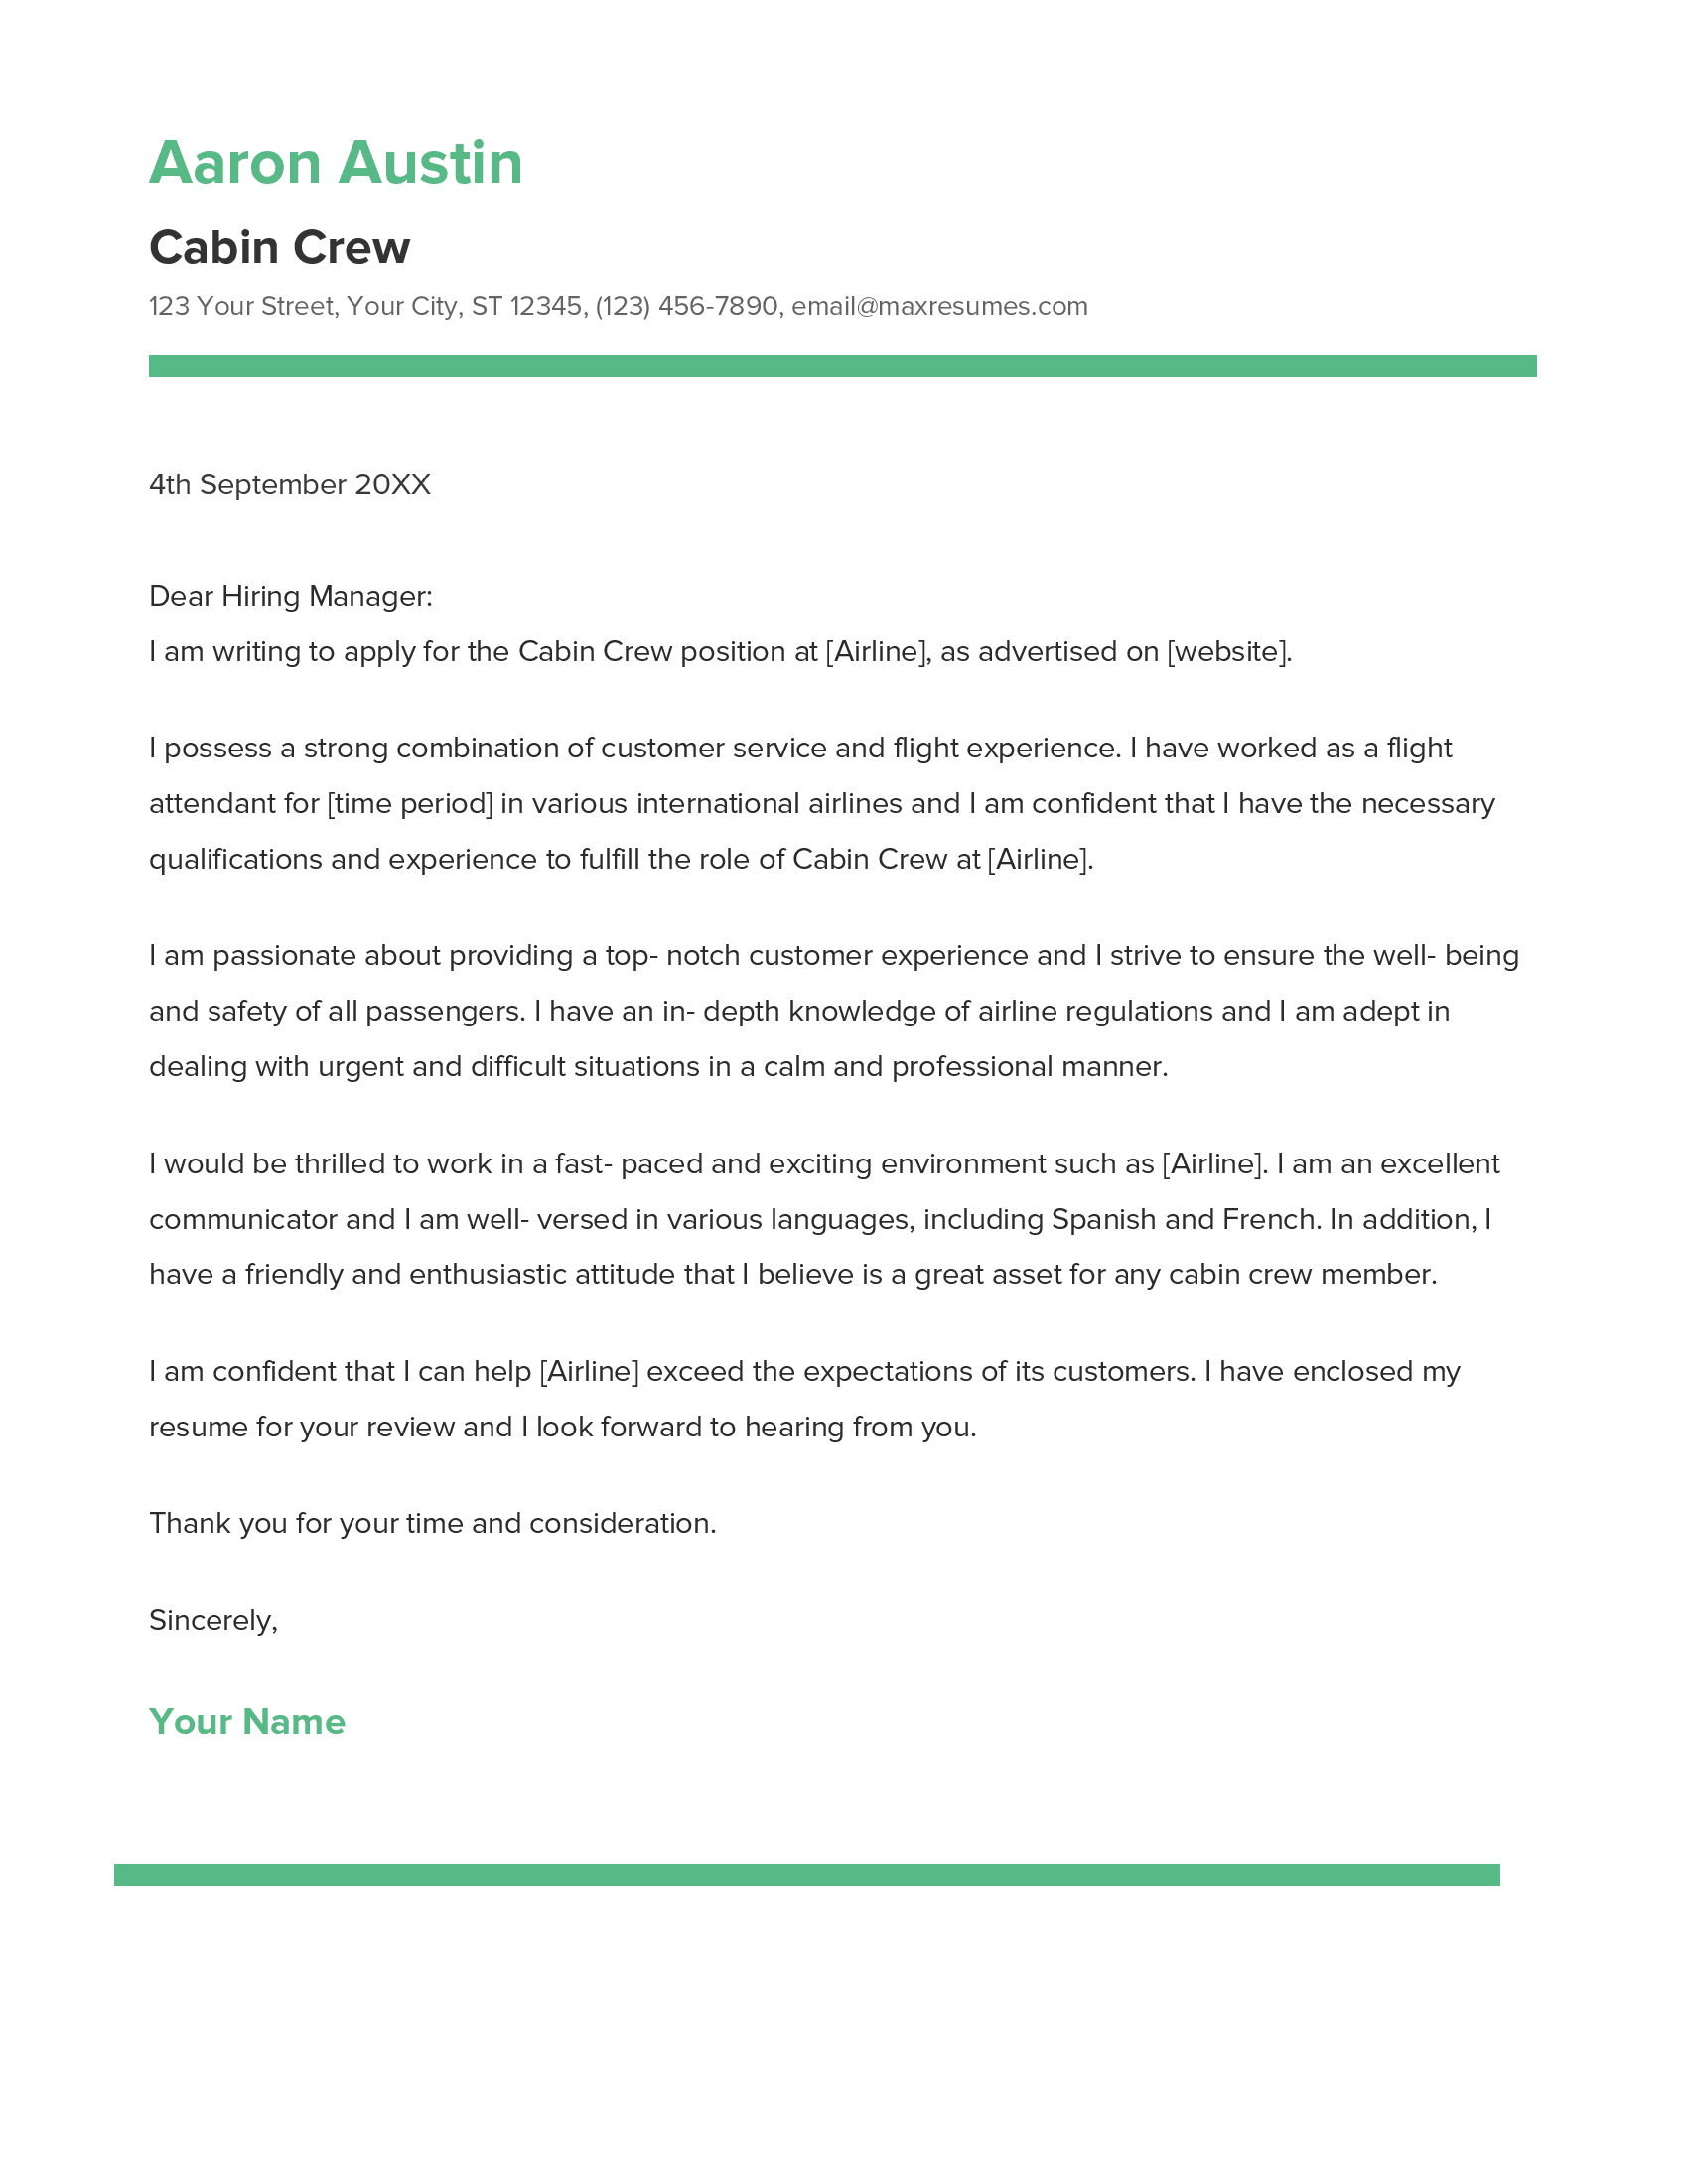 Cabin Crew Cover Letter Example